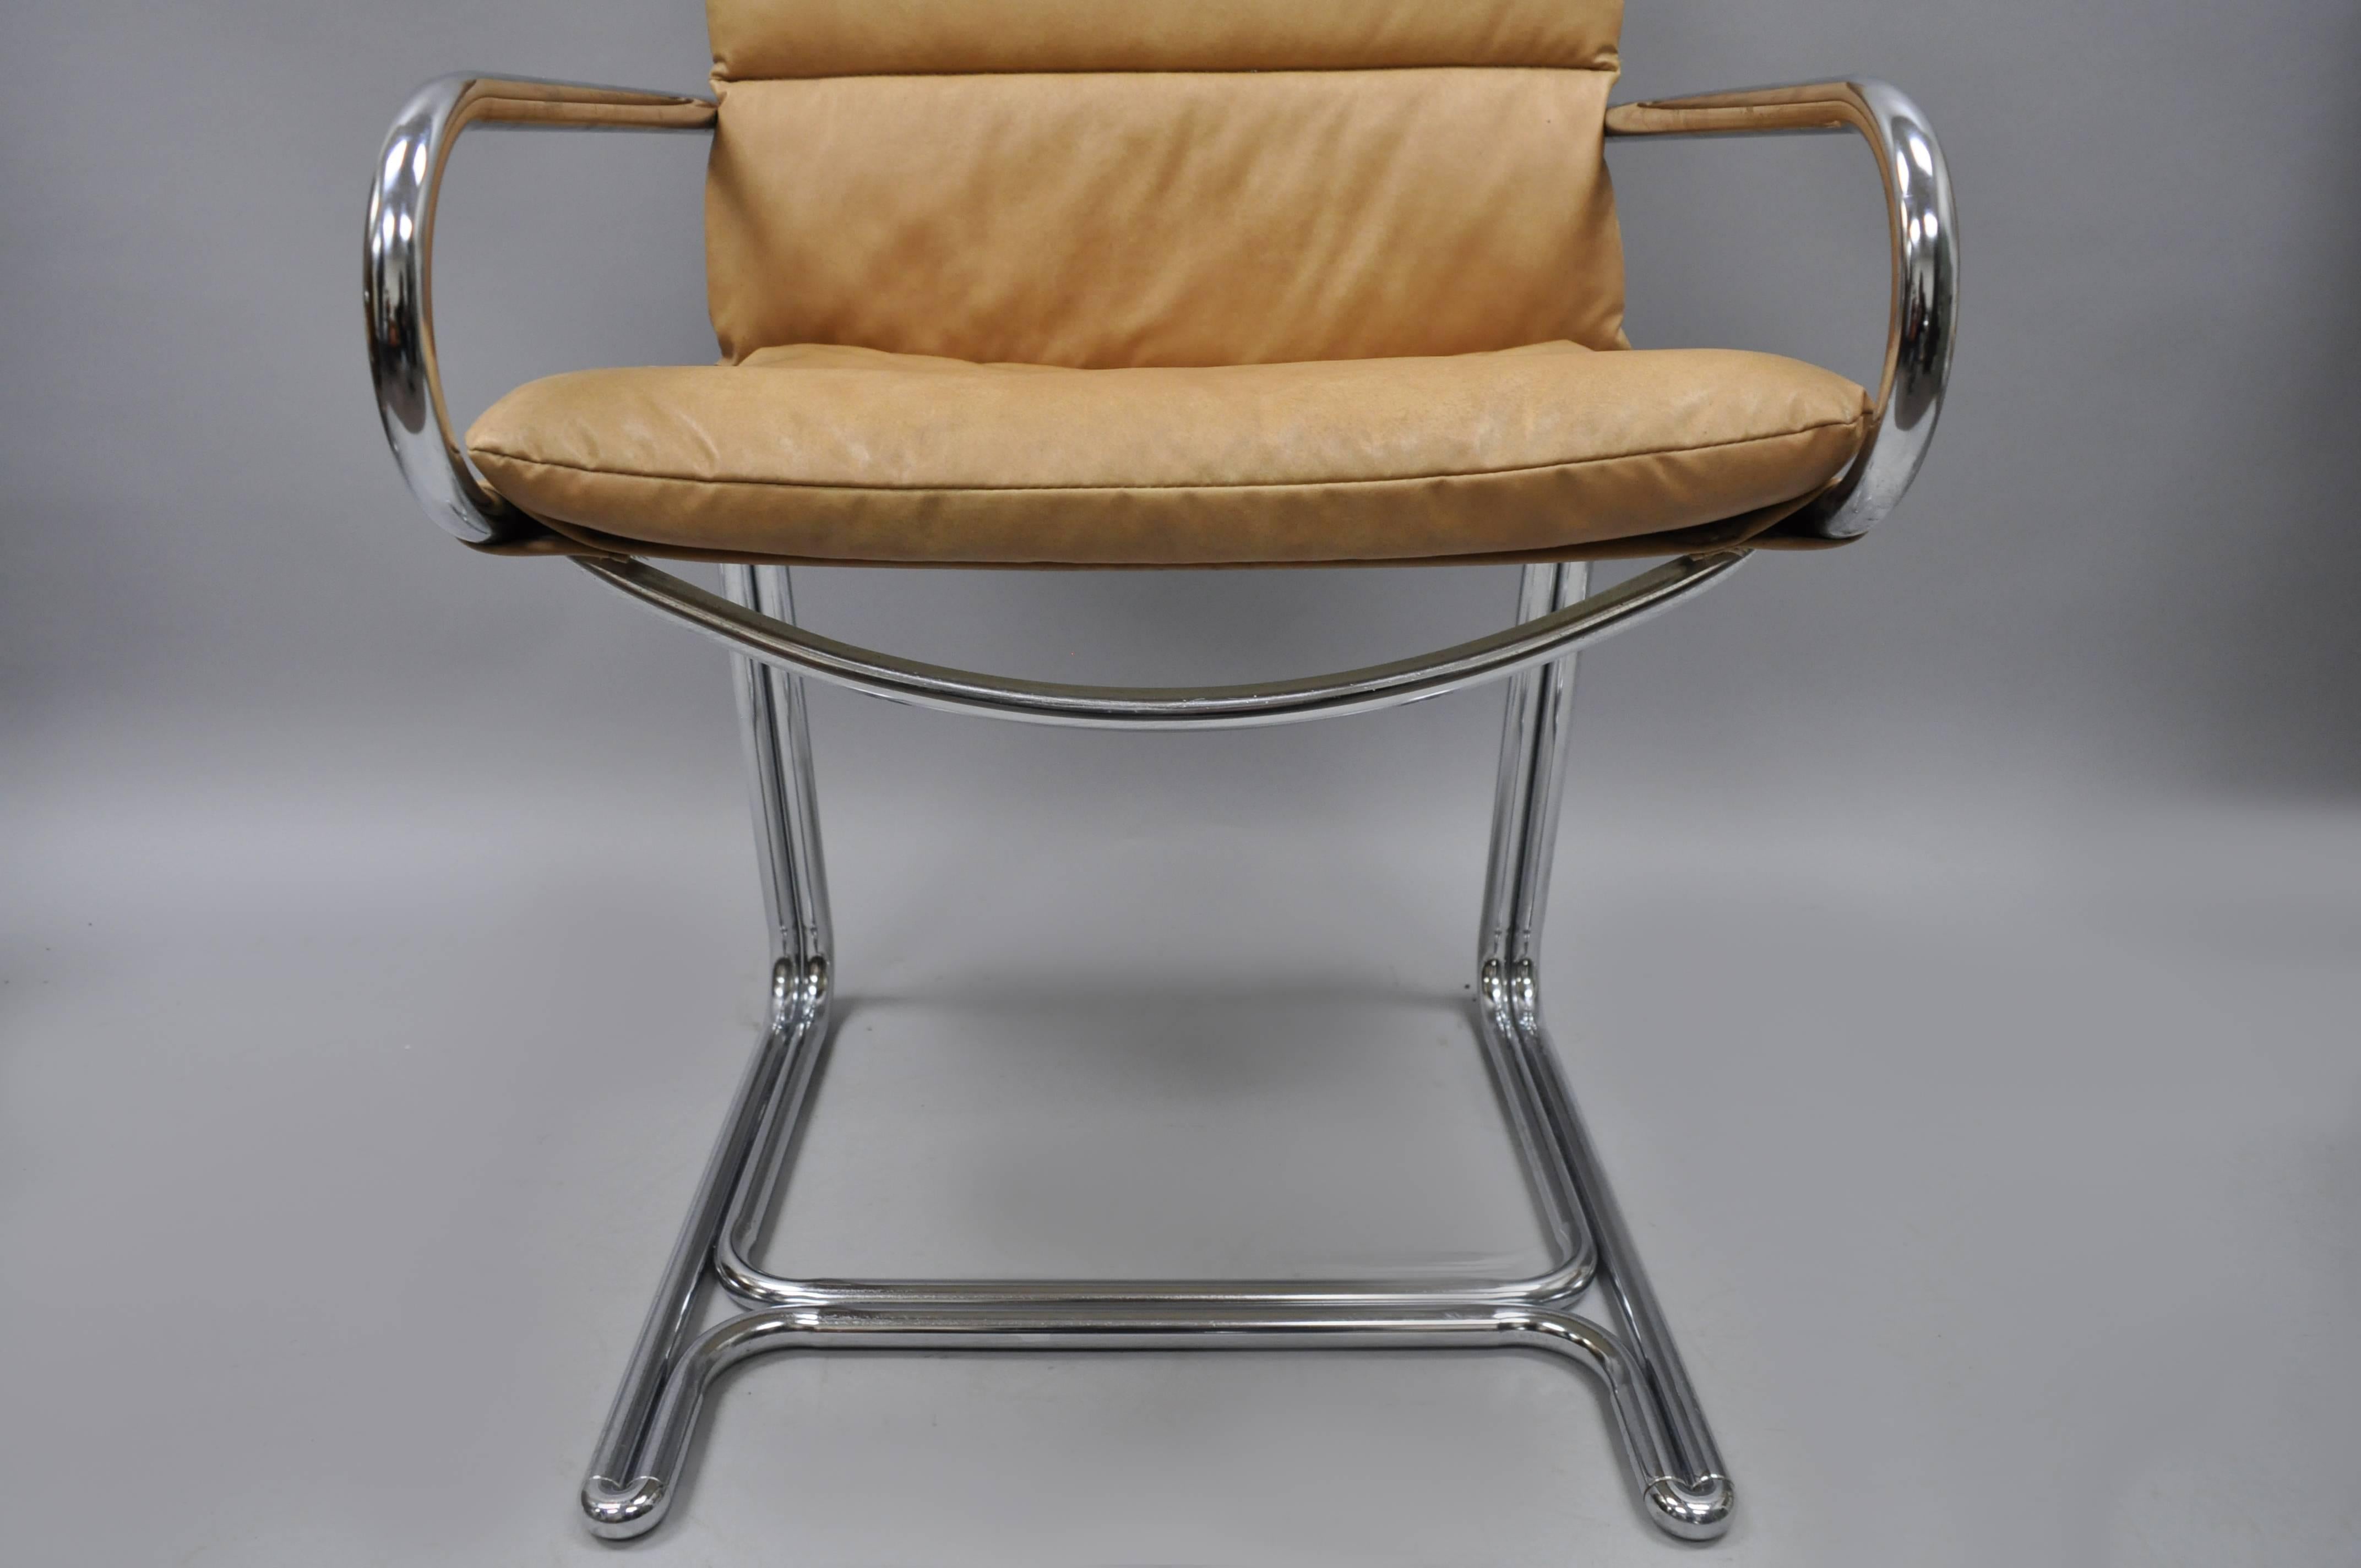 American Four Tubular Chrome Cantilever Style Arm Chairs by Cosco Inc after Milo Baughman